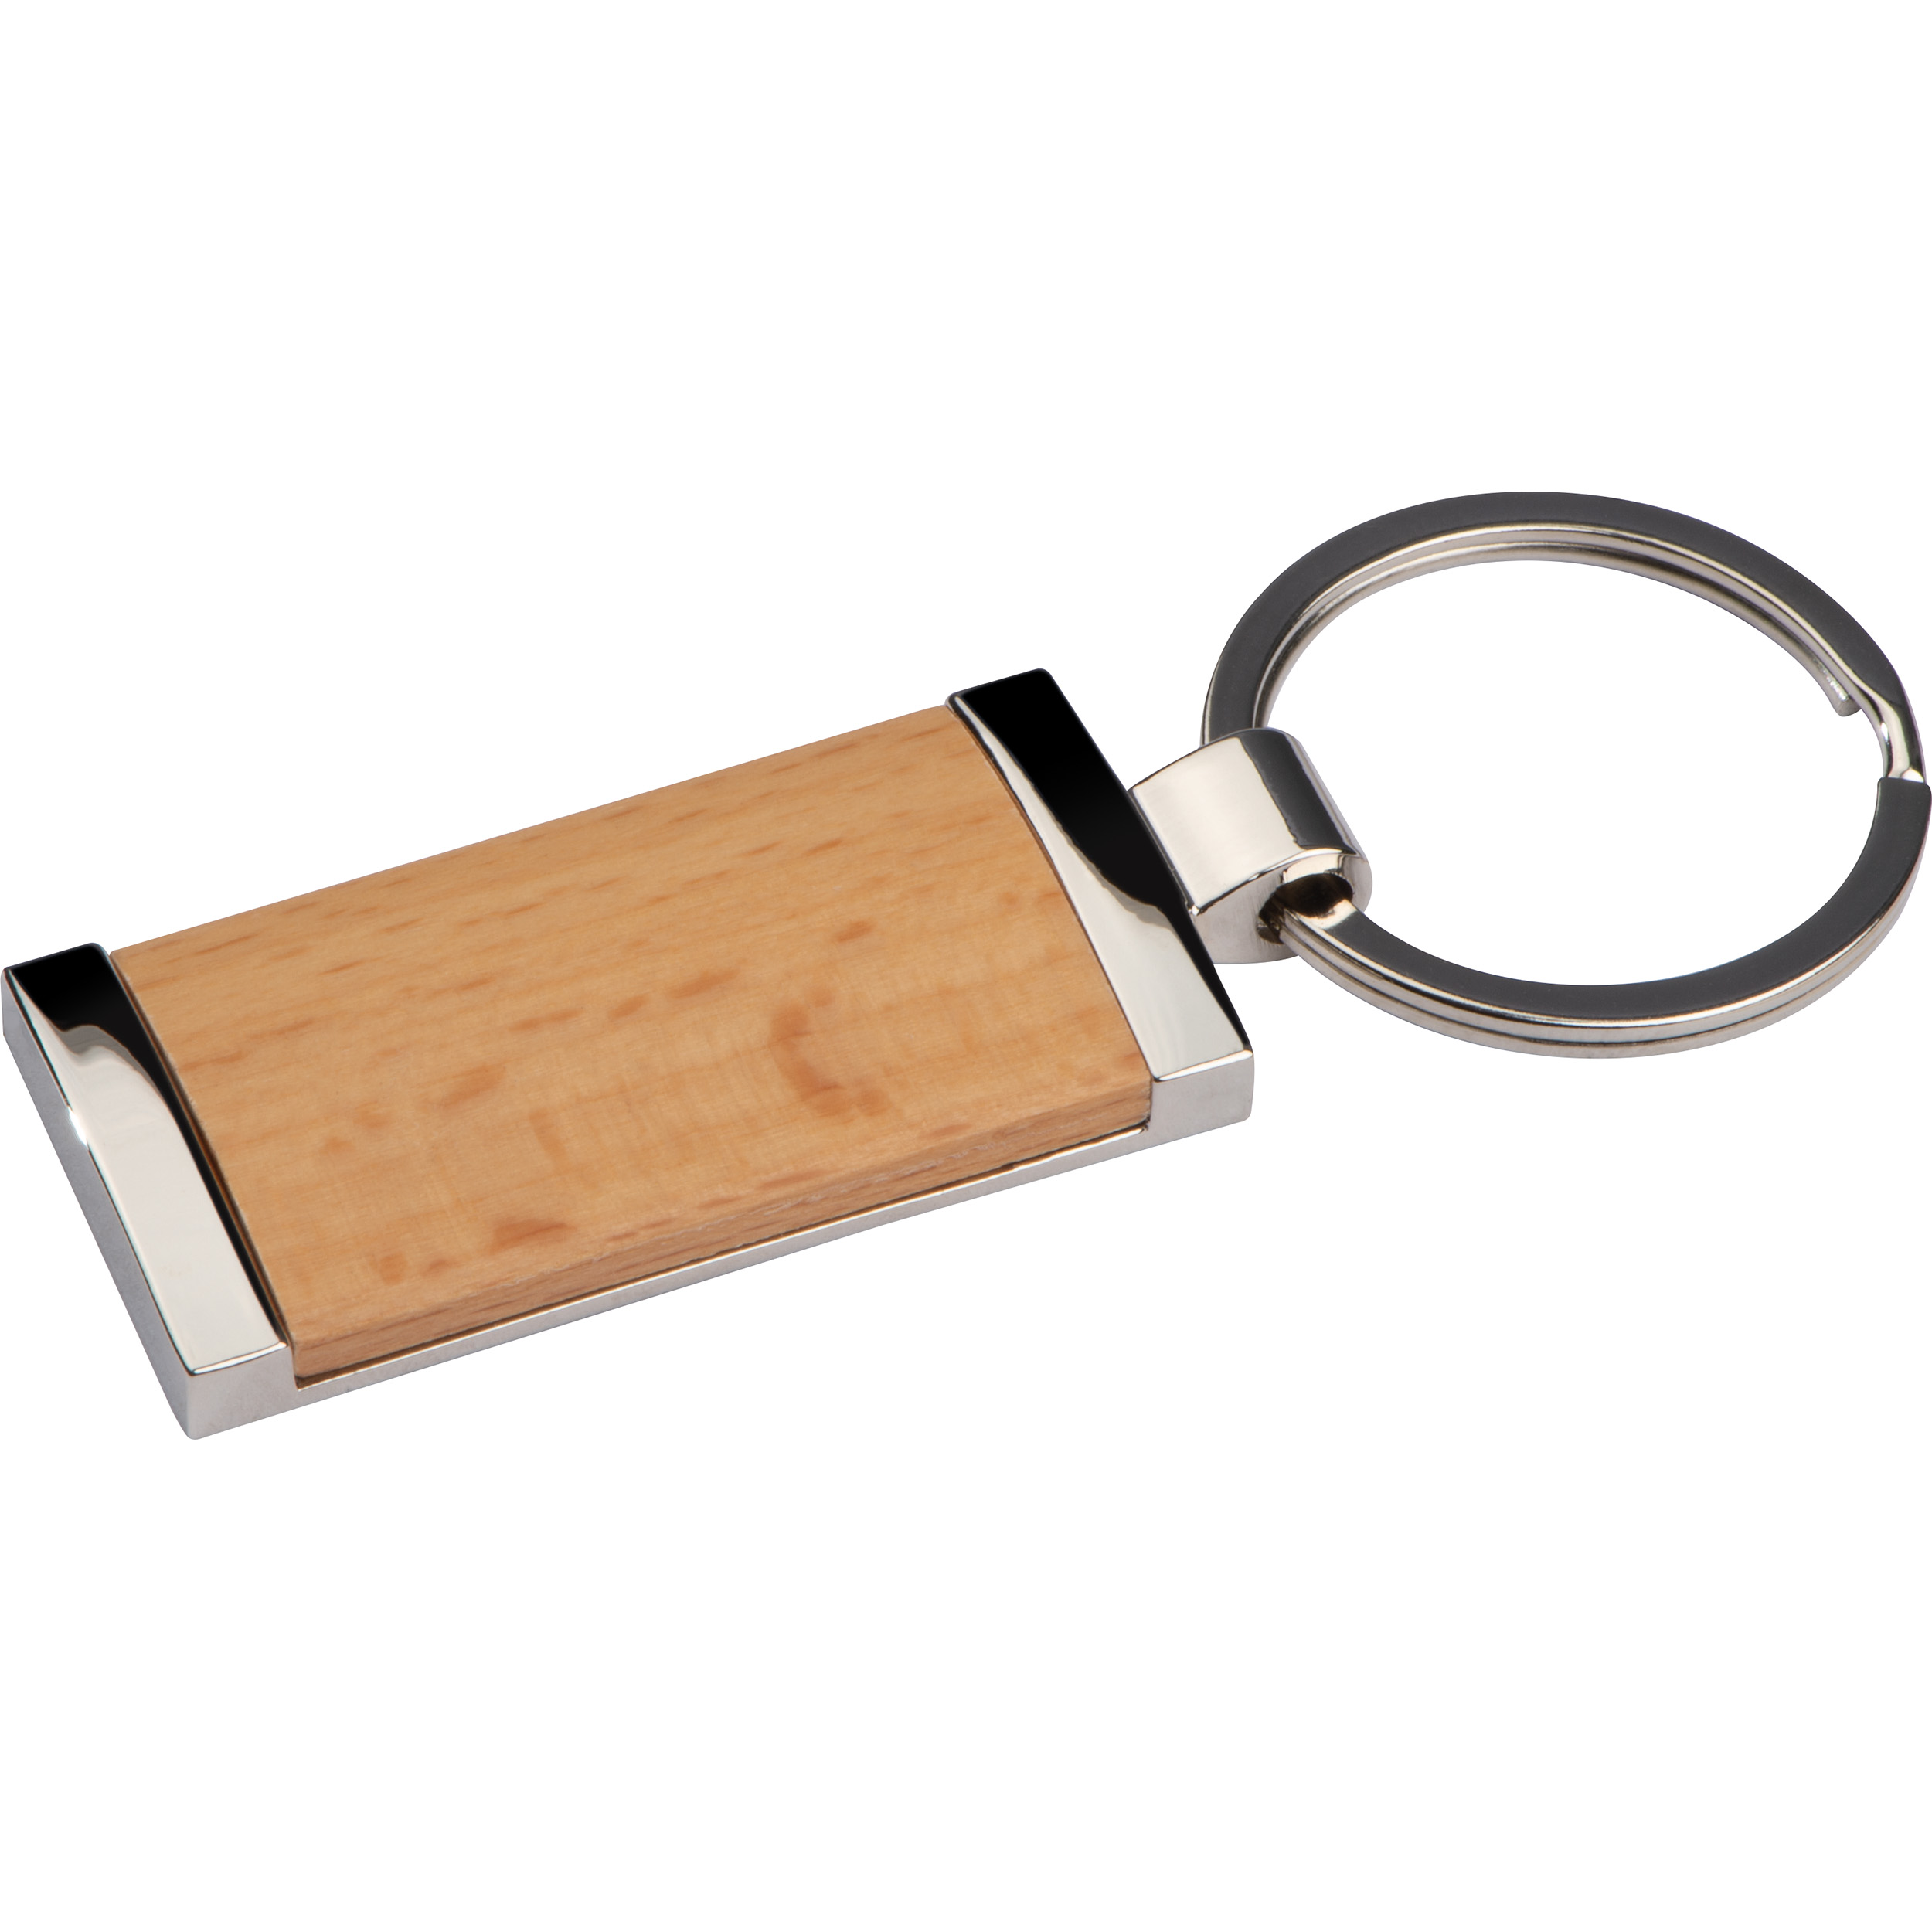 Keyring with wooden stick